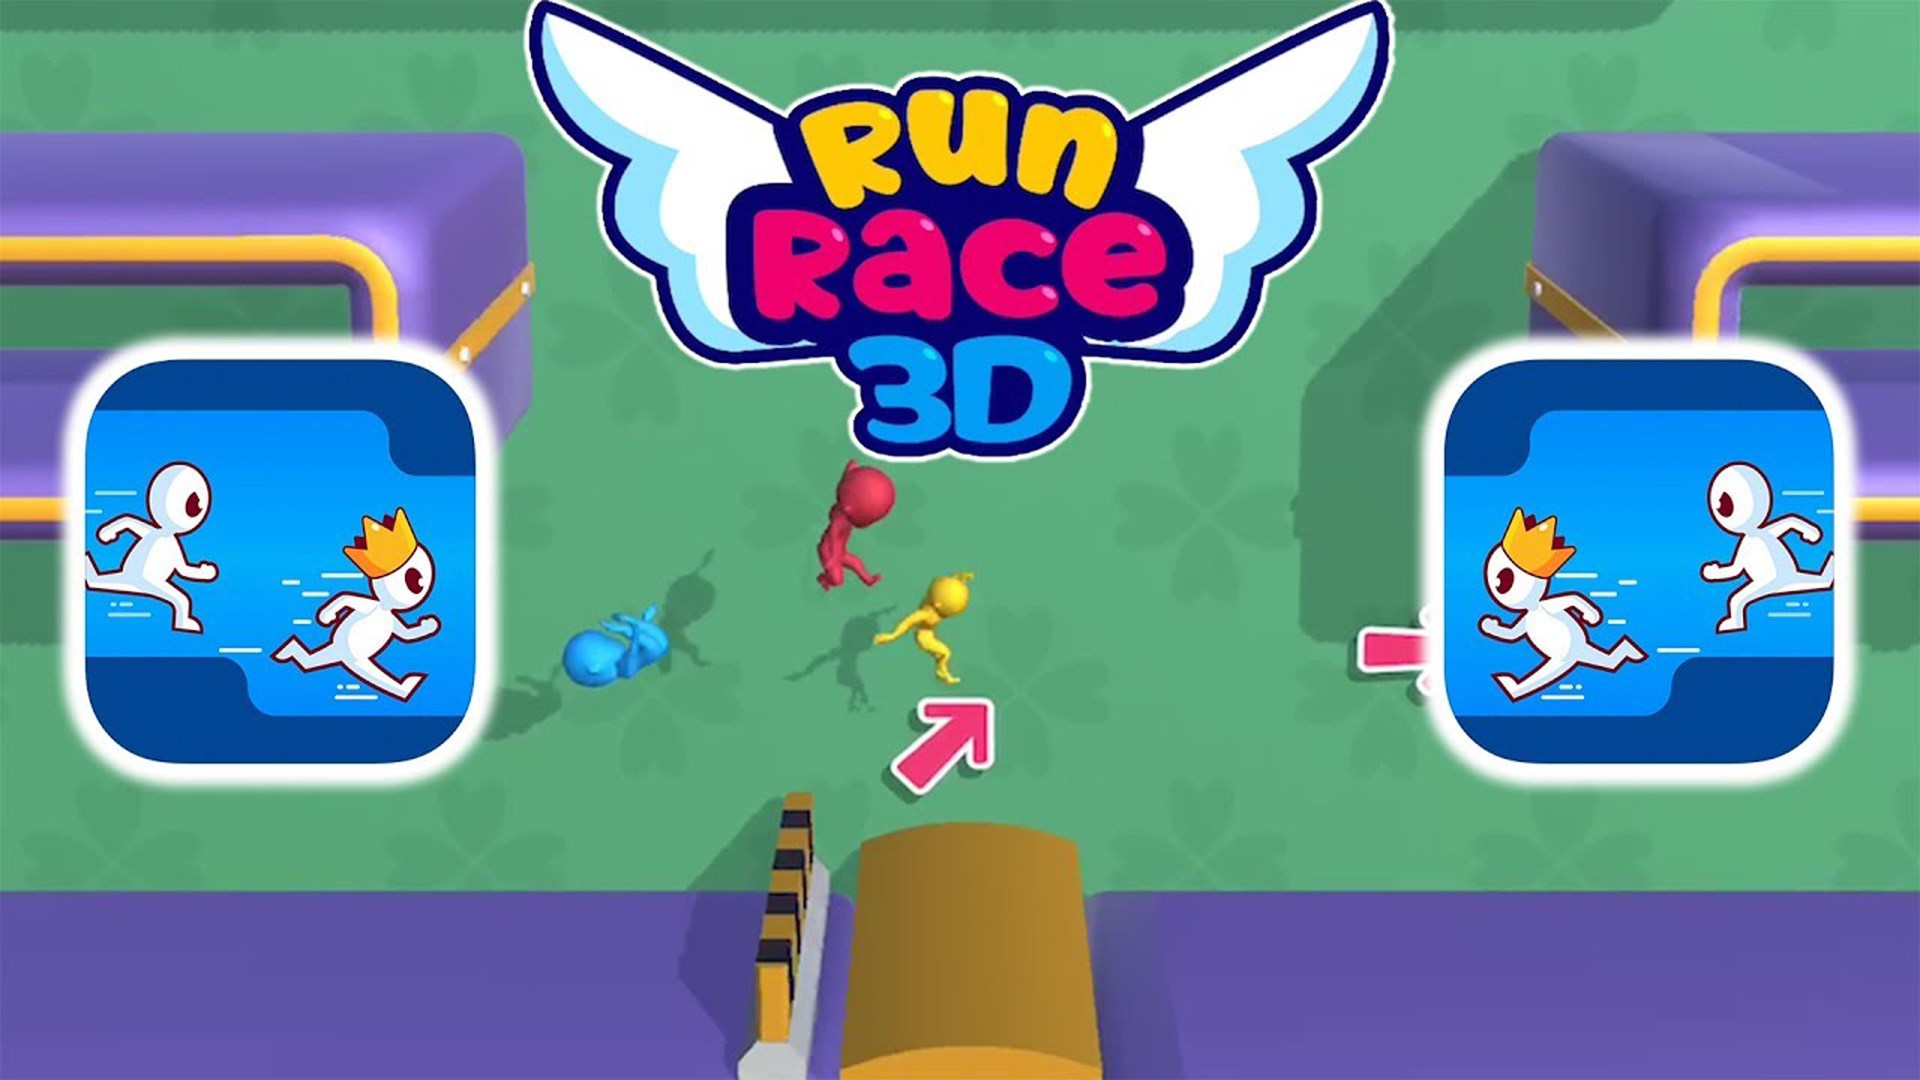 How to Get Free Coins on Run Race 3D Mobile